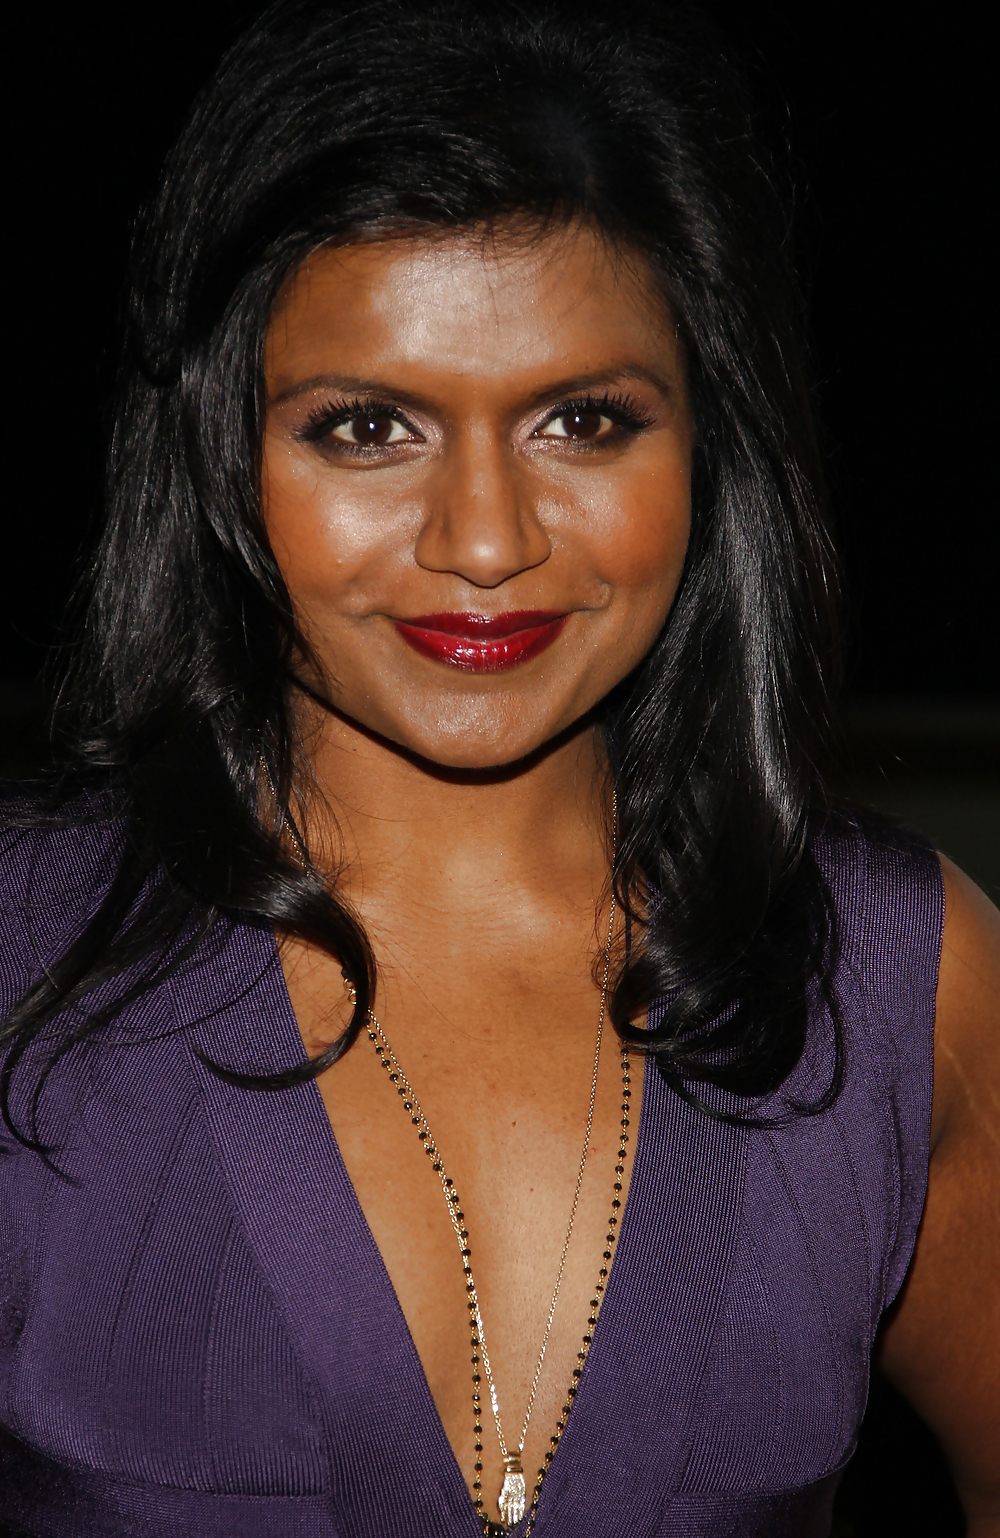 Hot Indian comedian Mindy Kaling - What would you do to her? #16250567